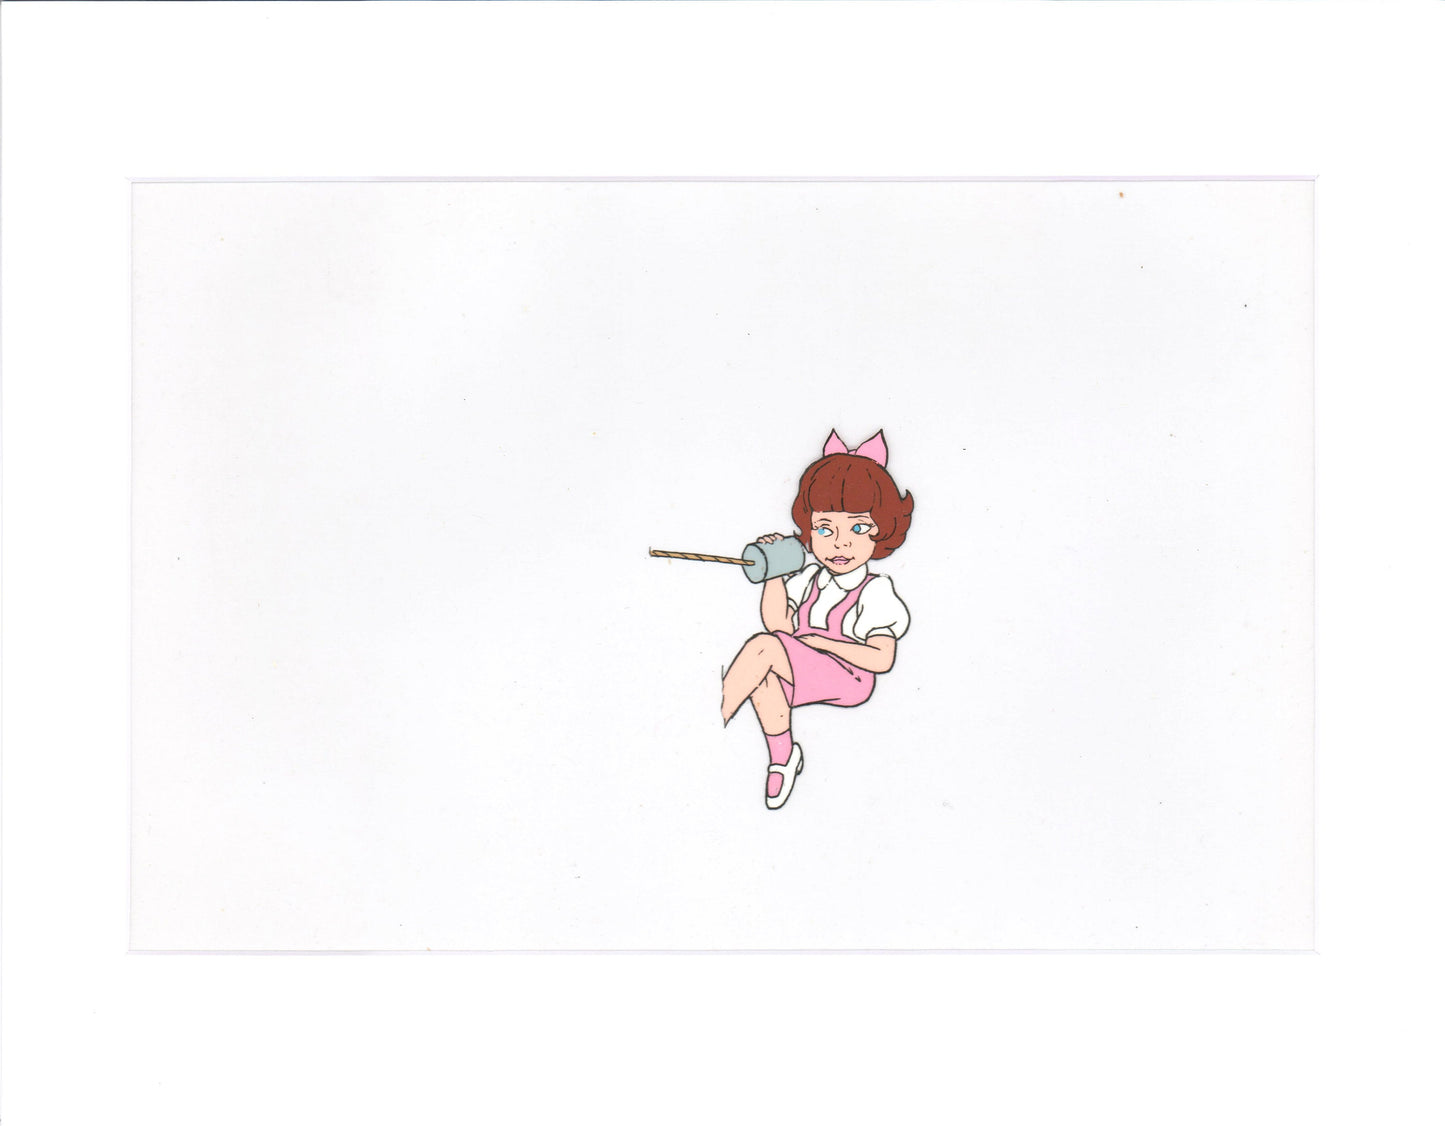 Little Rascals Production Animation Cel with Darla from Hanna Barbera 1982-83 m53